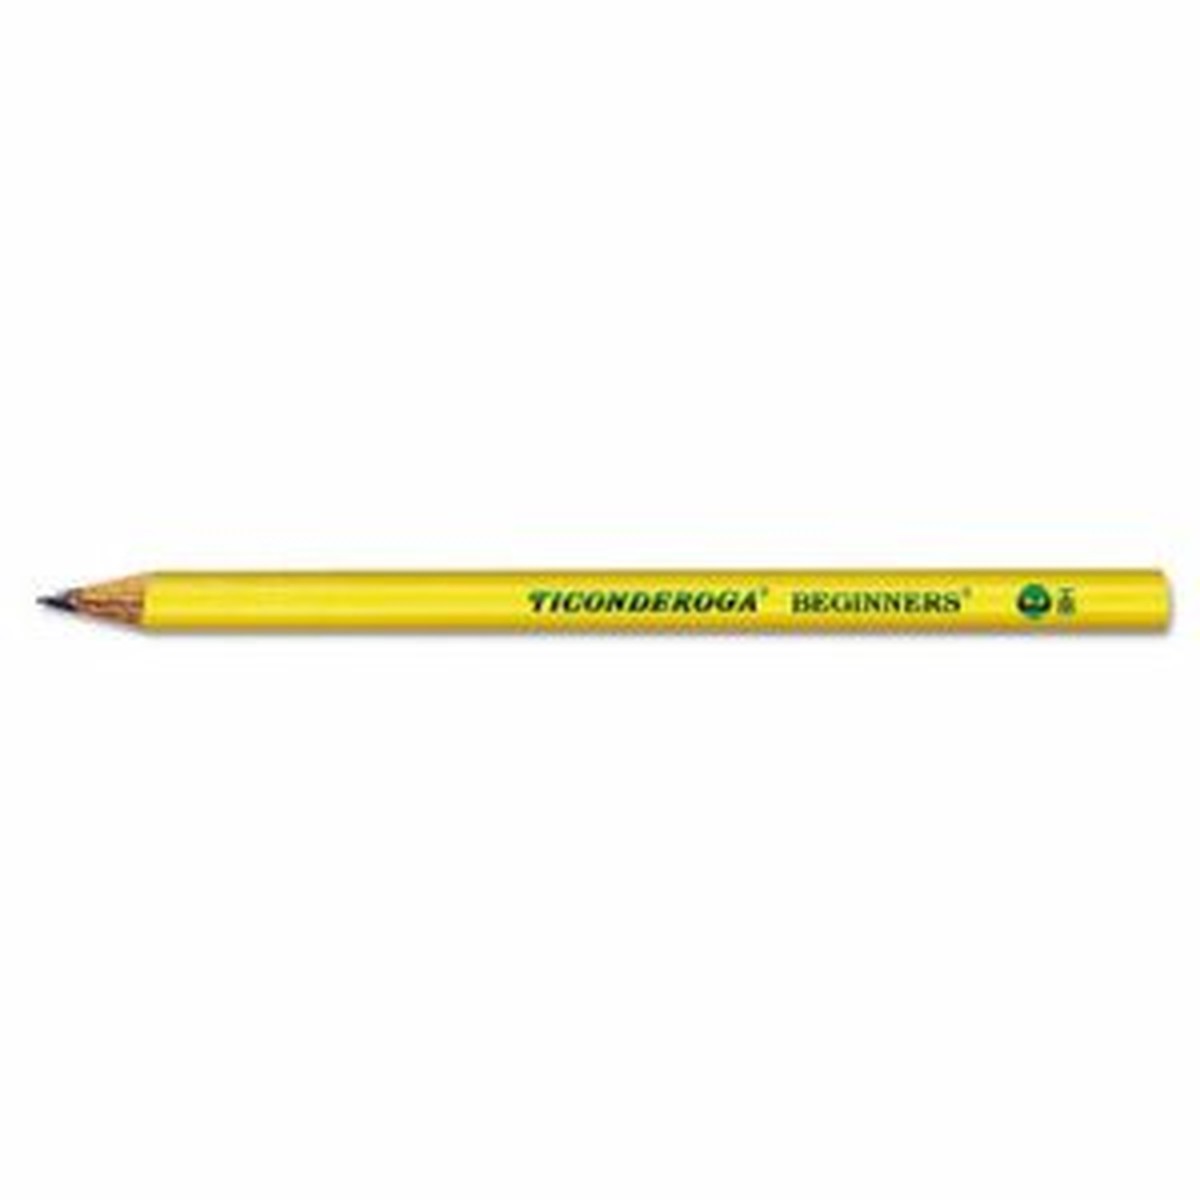 Beginners Pencils without Eraser, Pack of 12